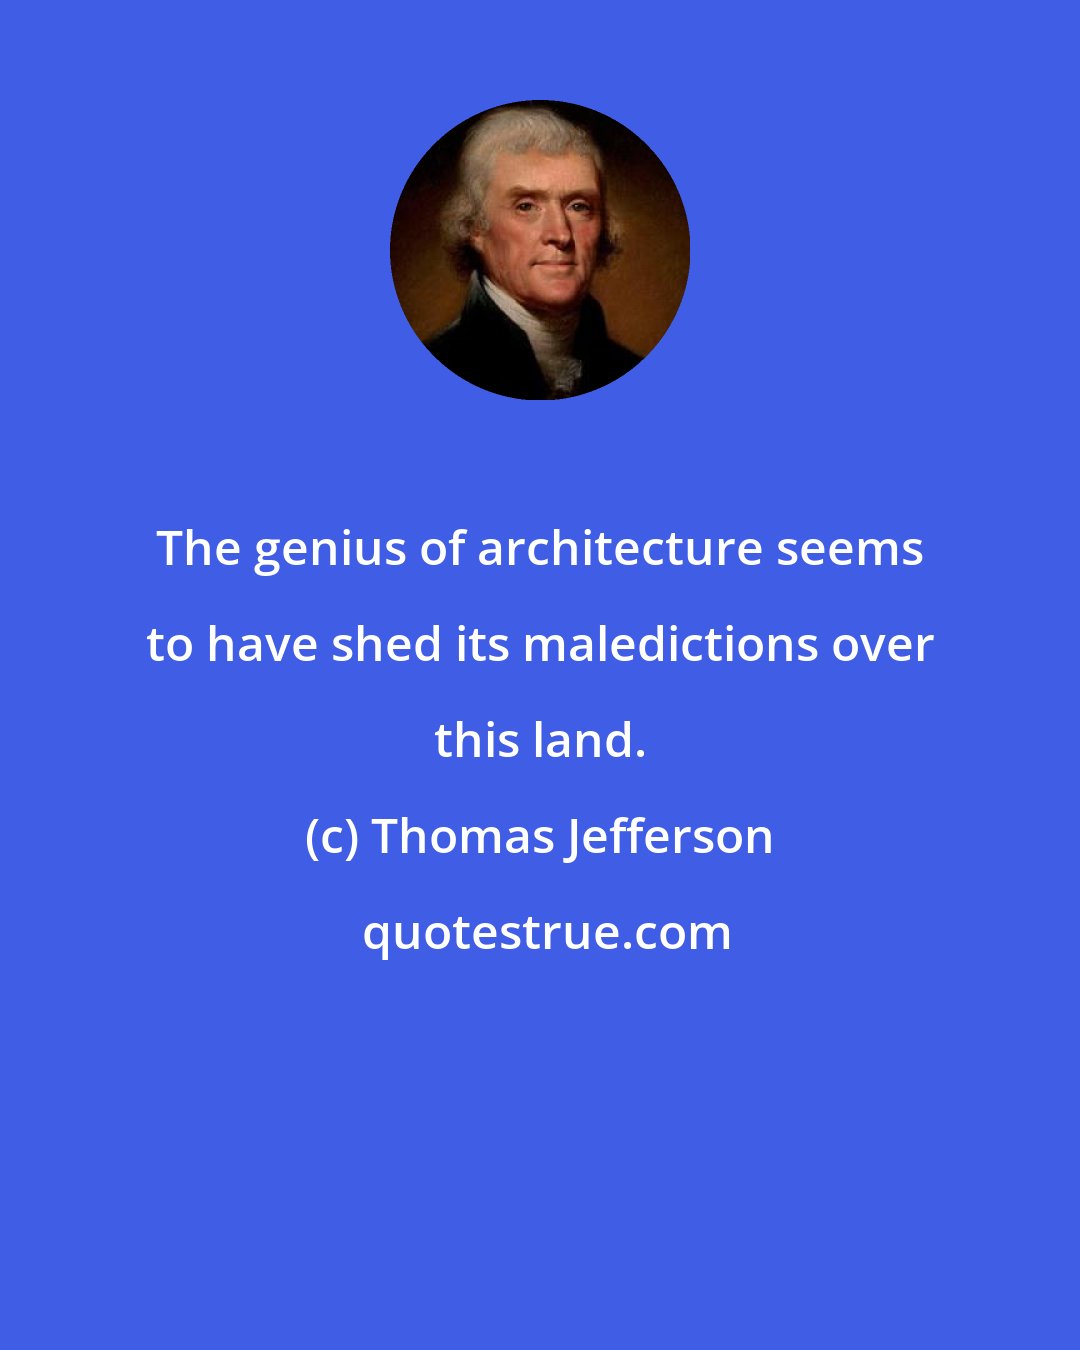 Thomas Jefferson: The genius of architecture seems to have shed its maledictions over this land.